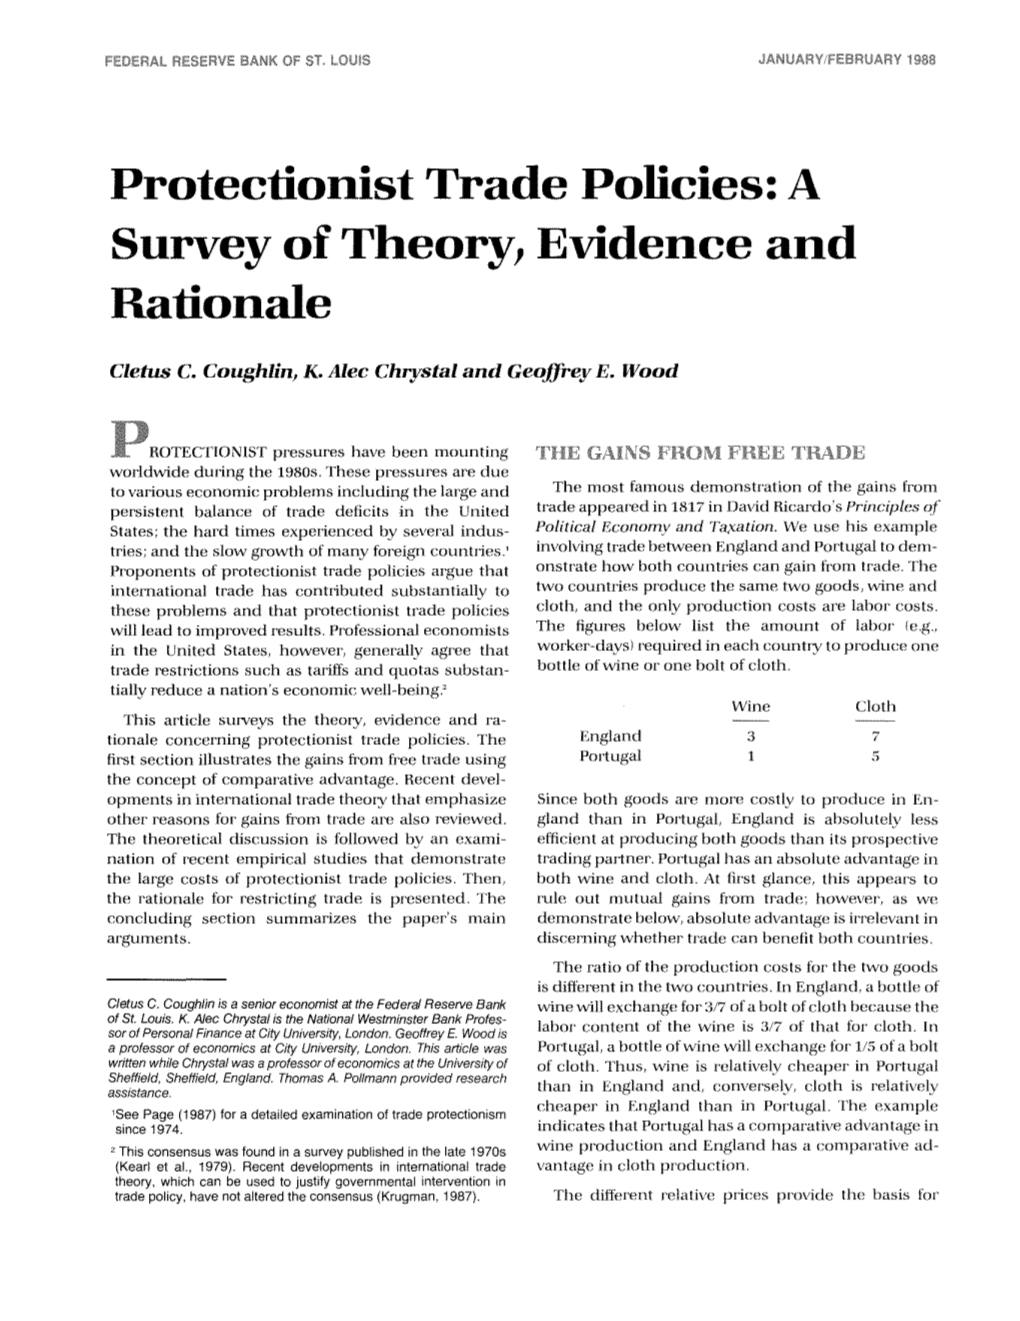 Protectionist Trade Policies: a Survey of Theory, Evidence and Rationale